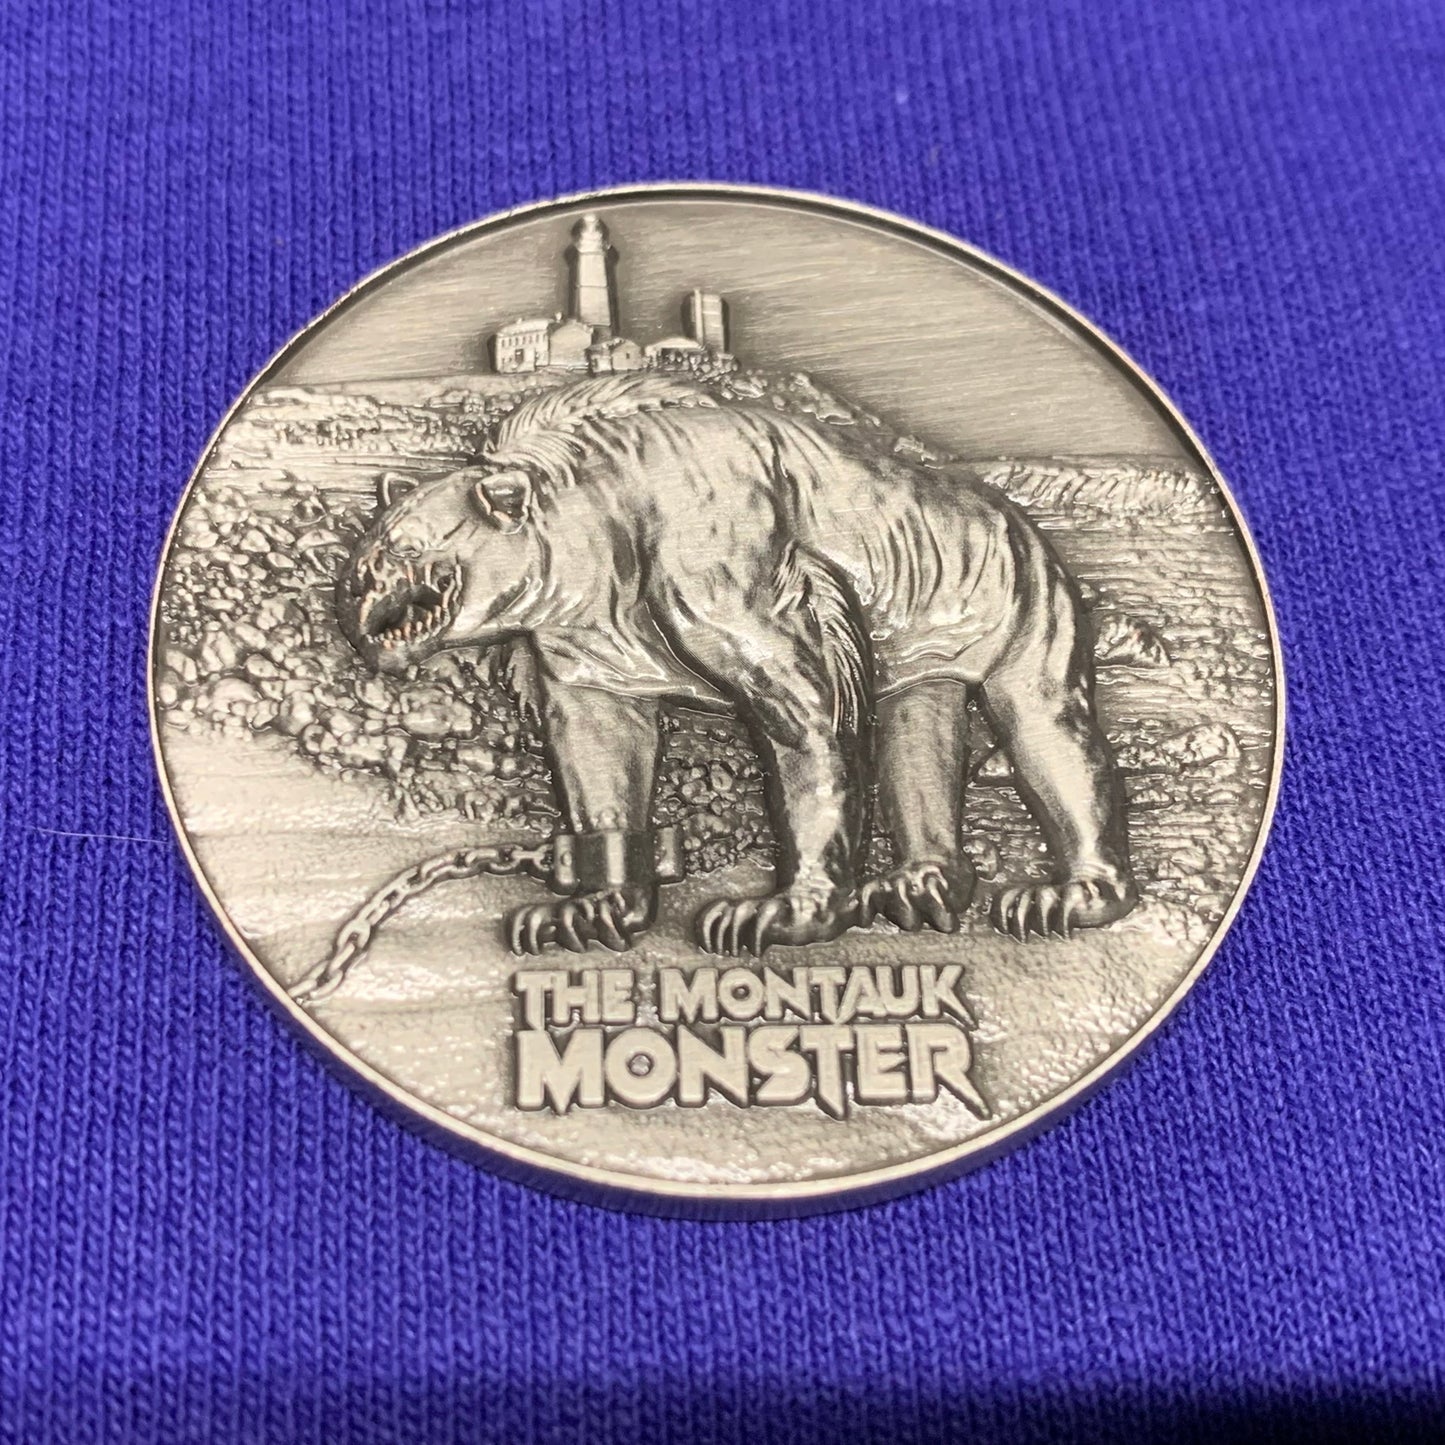 Collectible Cryptozoology Challenge Coin